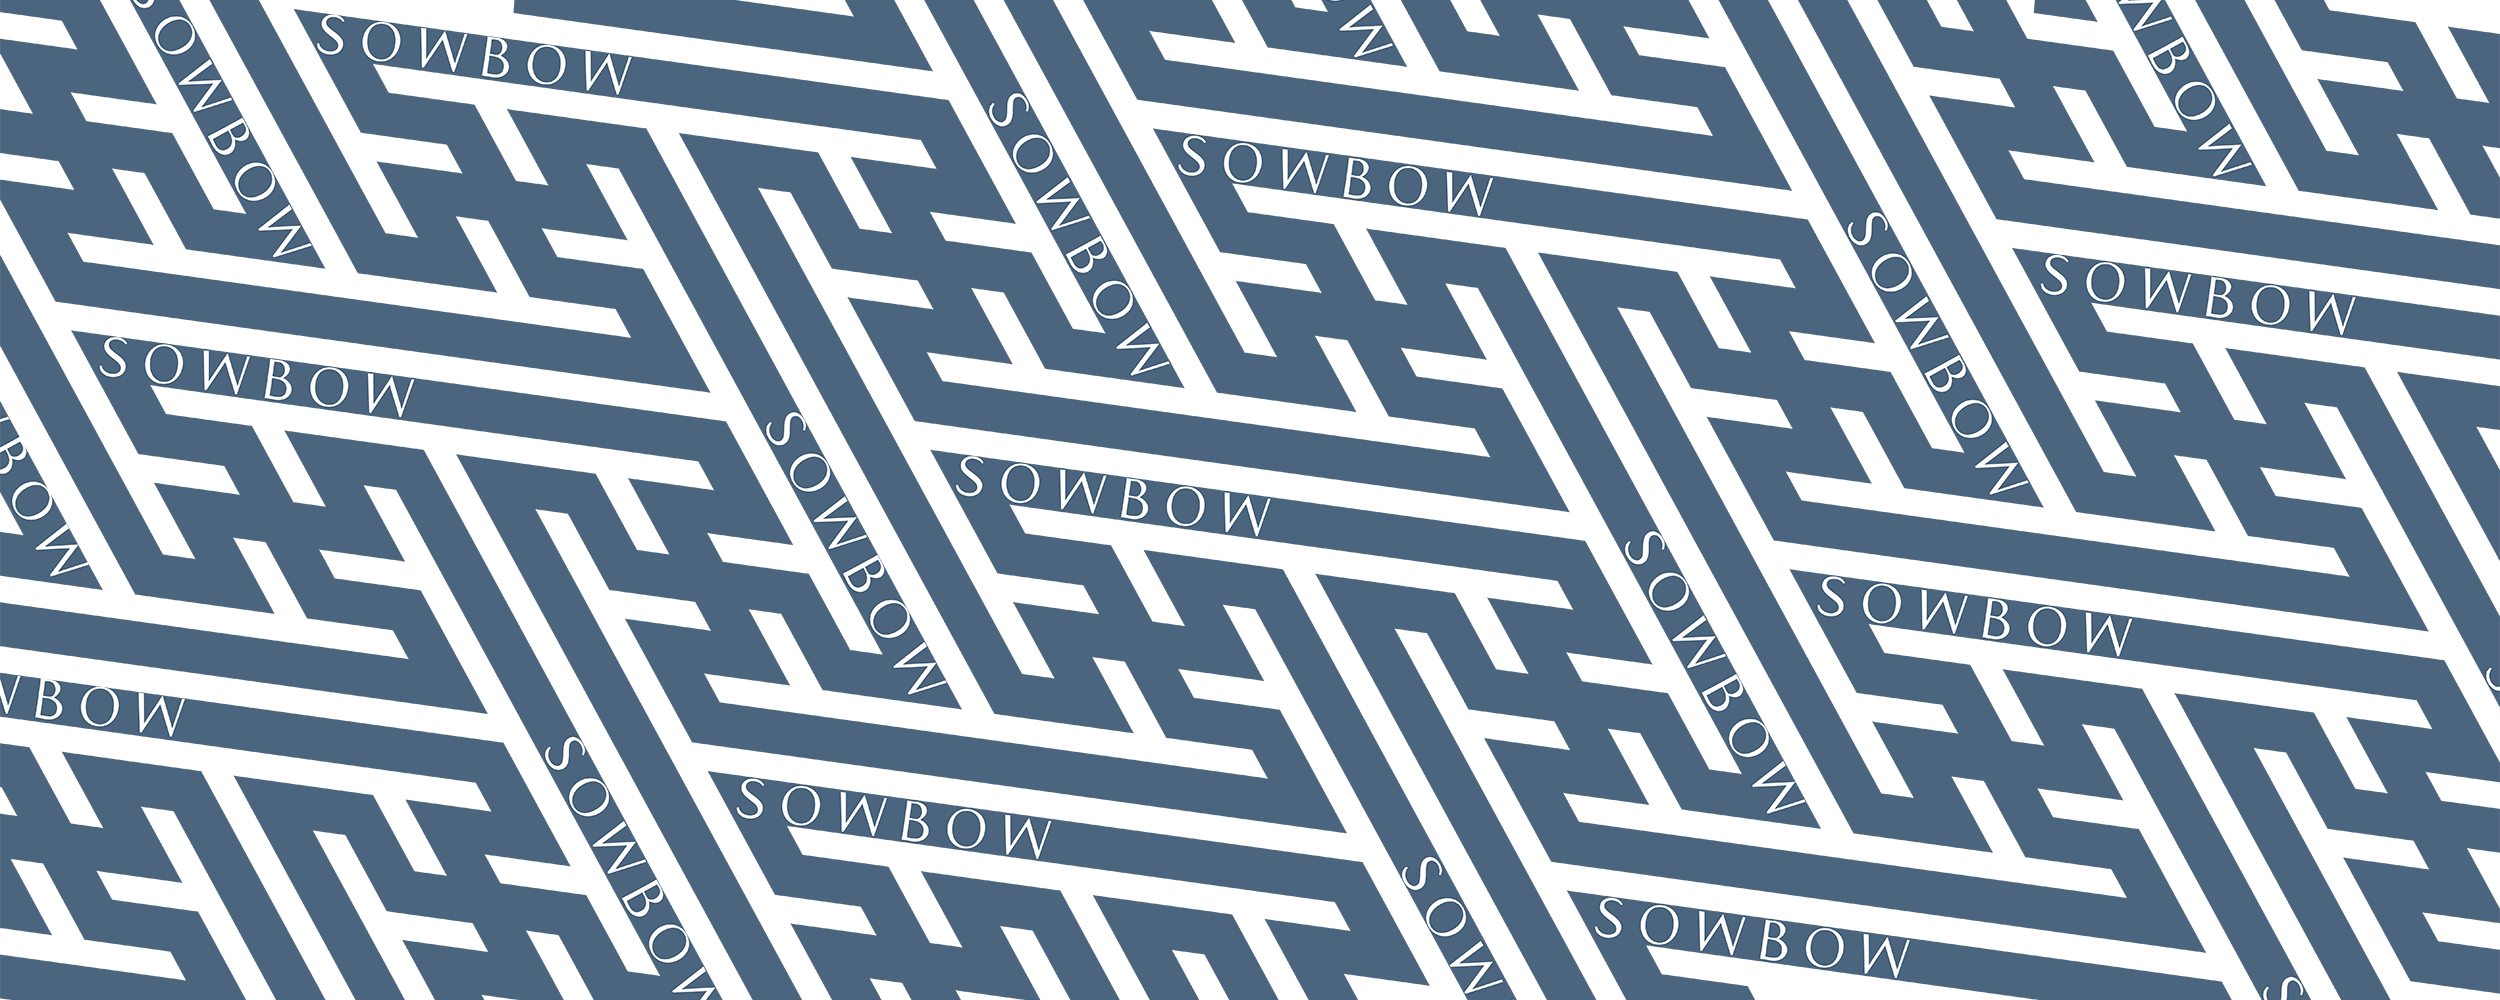 sowbow